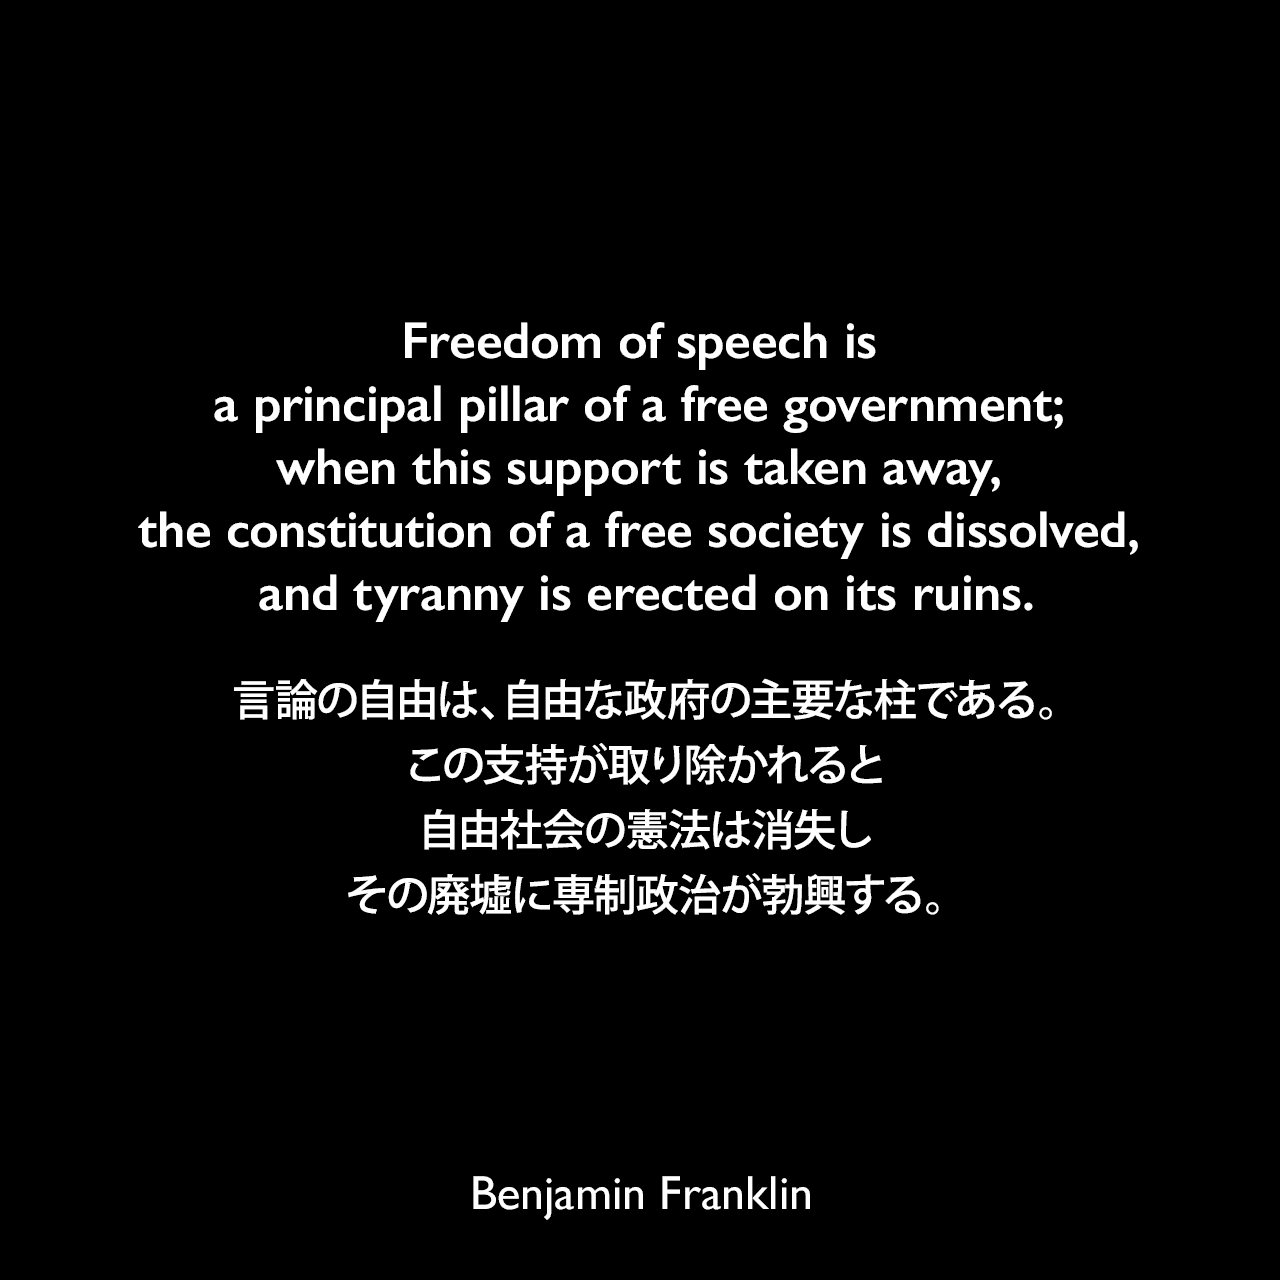 Freedom of speech is a principal pillar of a free government; when this support is taken away, the constitution of a free society is dissolved, and tyranny is erected on its ruins.言論の自由は、自由な政府の主要な柱である。この支持が取り除かれると自由社会の憲法は消失し、その廃墟に専制政治が勃興する。- 1737年のペンシルヴェニア官報「言論と報道の自由について」よりBenjamin Franklin